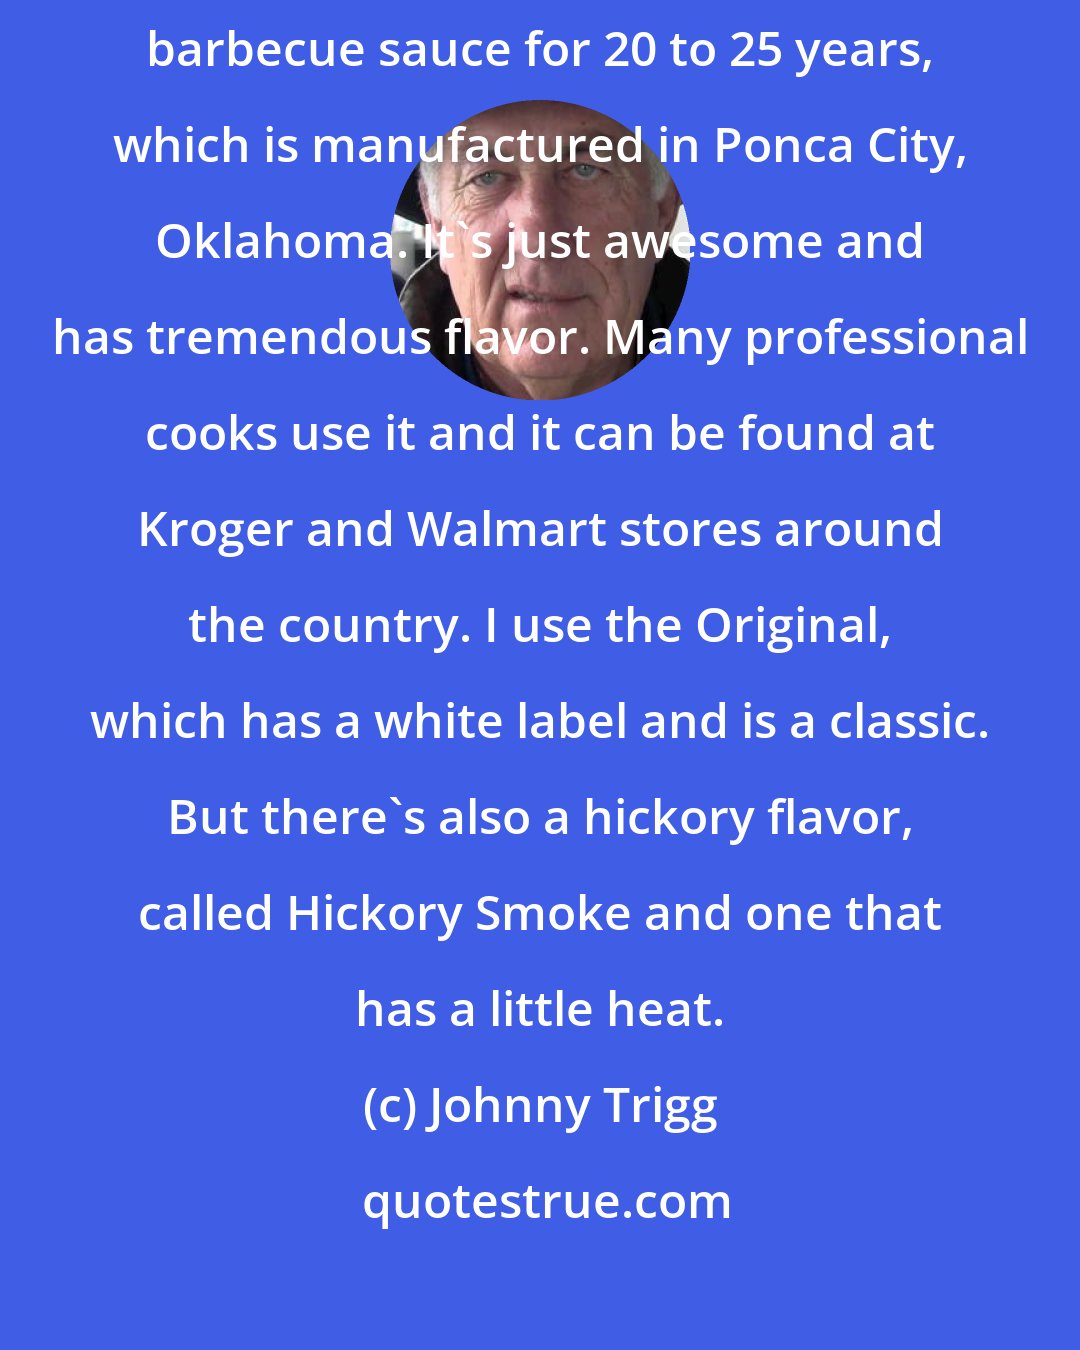 Johnny Trigg: There are a lot of barbecue sauces. But I've been using Head Country barbecue sauce for 20 to 25 years, which is manufactured in Ponca City, Oklahoma. It's just awesome and has tremendous flavor. Many professional cooks use it and it can be found at Kroger and Walmart stores around the country. I use the Original, which has a white label and is a classic. But there's also a hickory flavor, called Hickory Smoke and one that has a little heat.